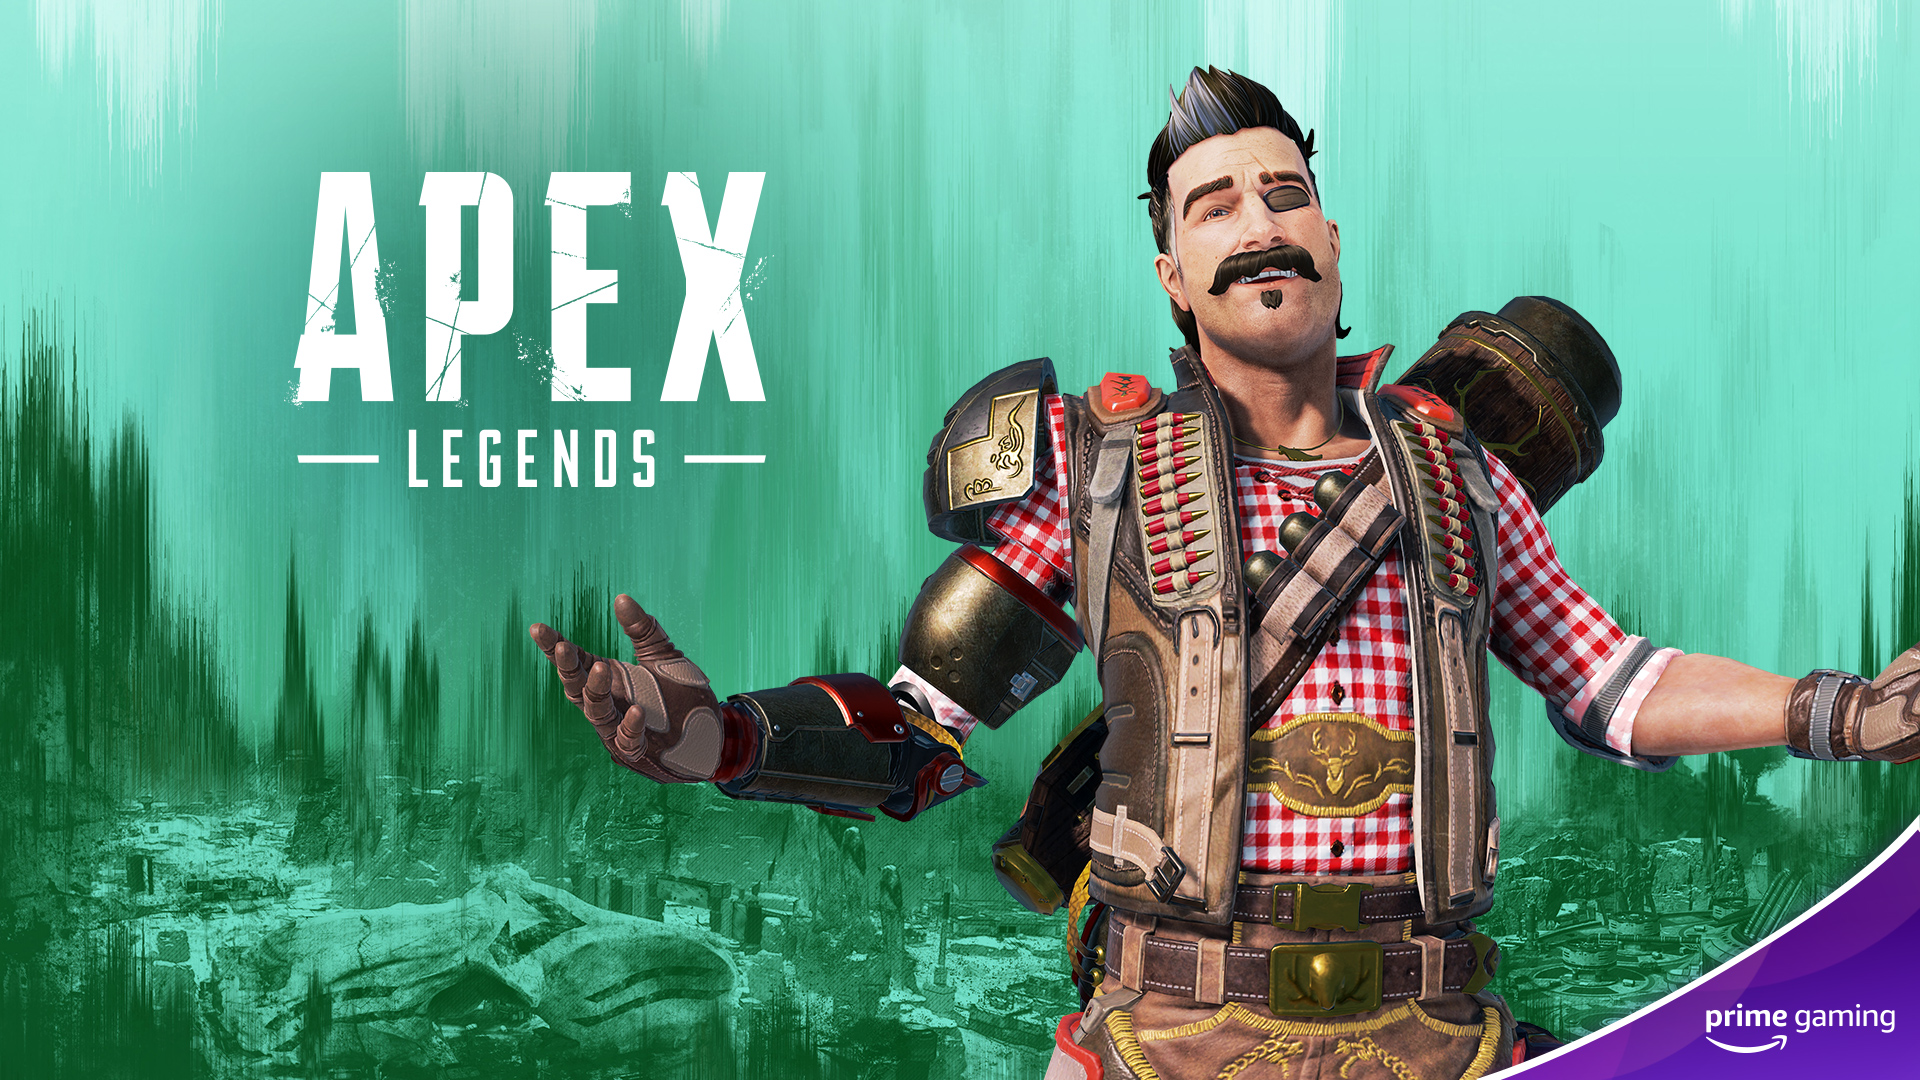 Here's How To Get Your Free 'Apex Legends' Twitch Prime Loot Pack